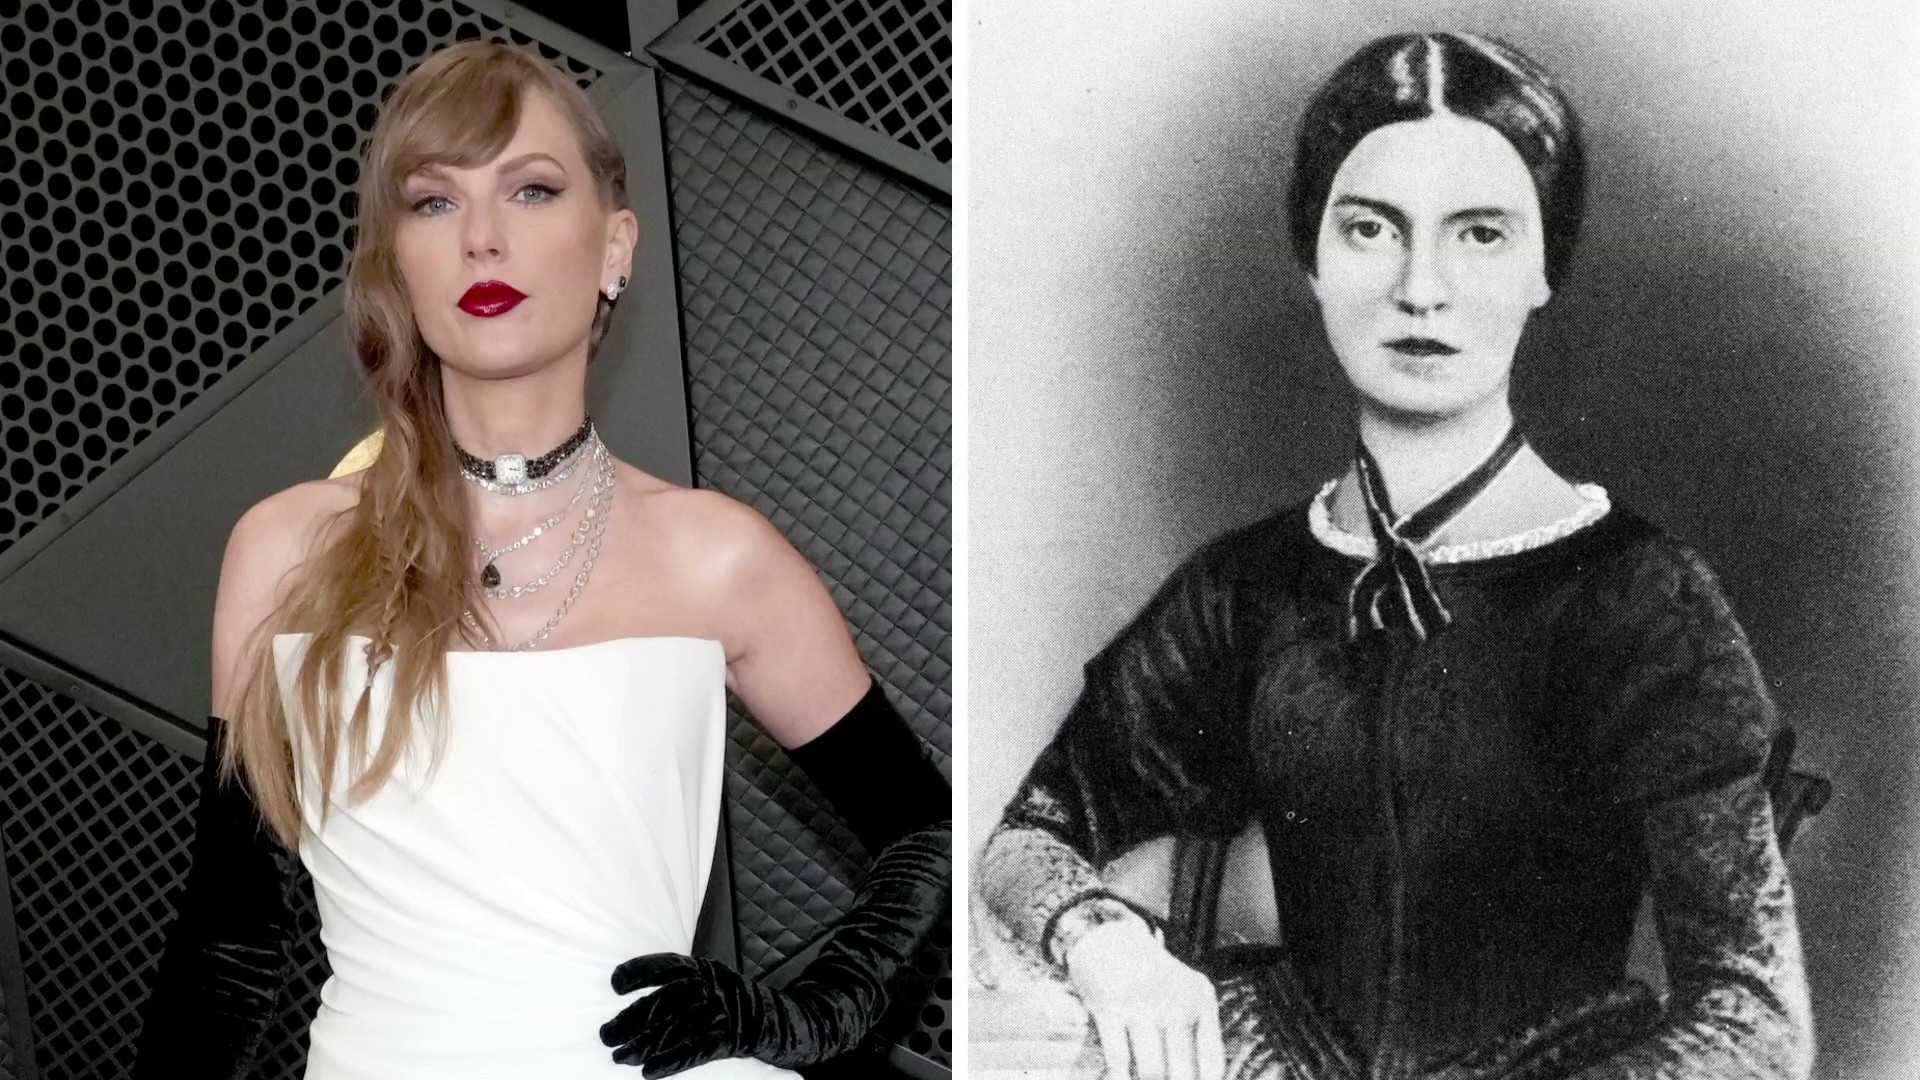 Tortured poets: Taylor Swift, Emily Dickinson revealed to be cousins